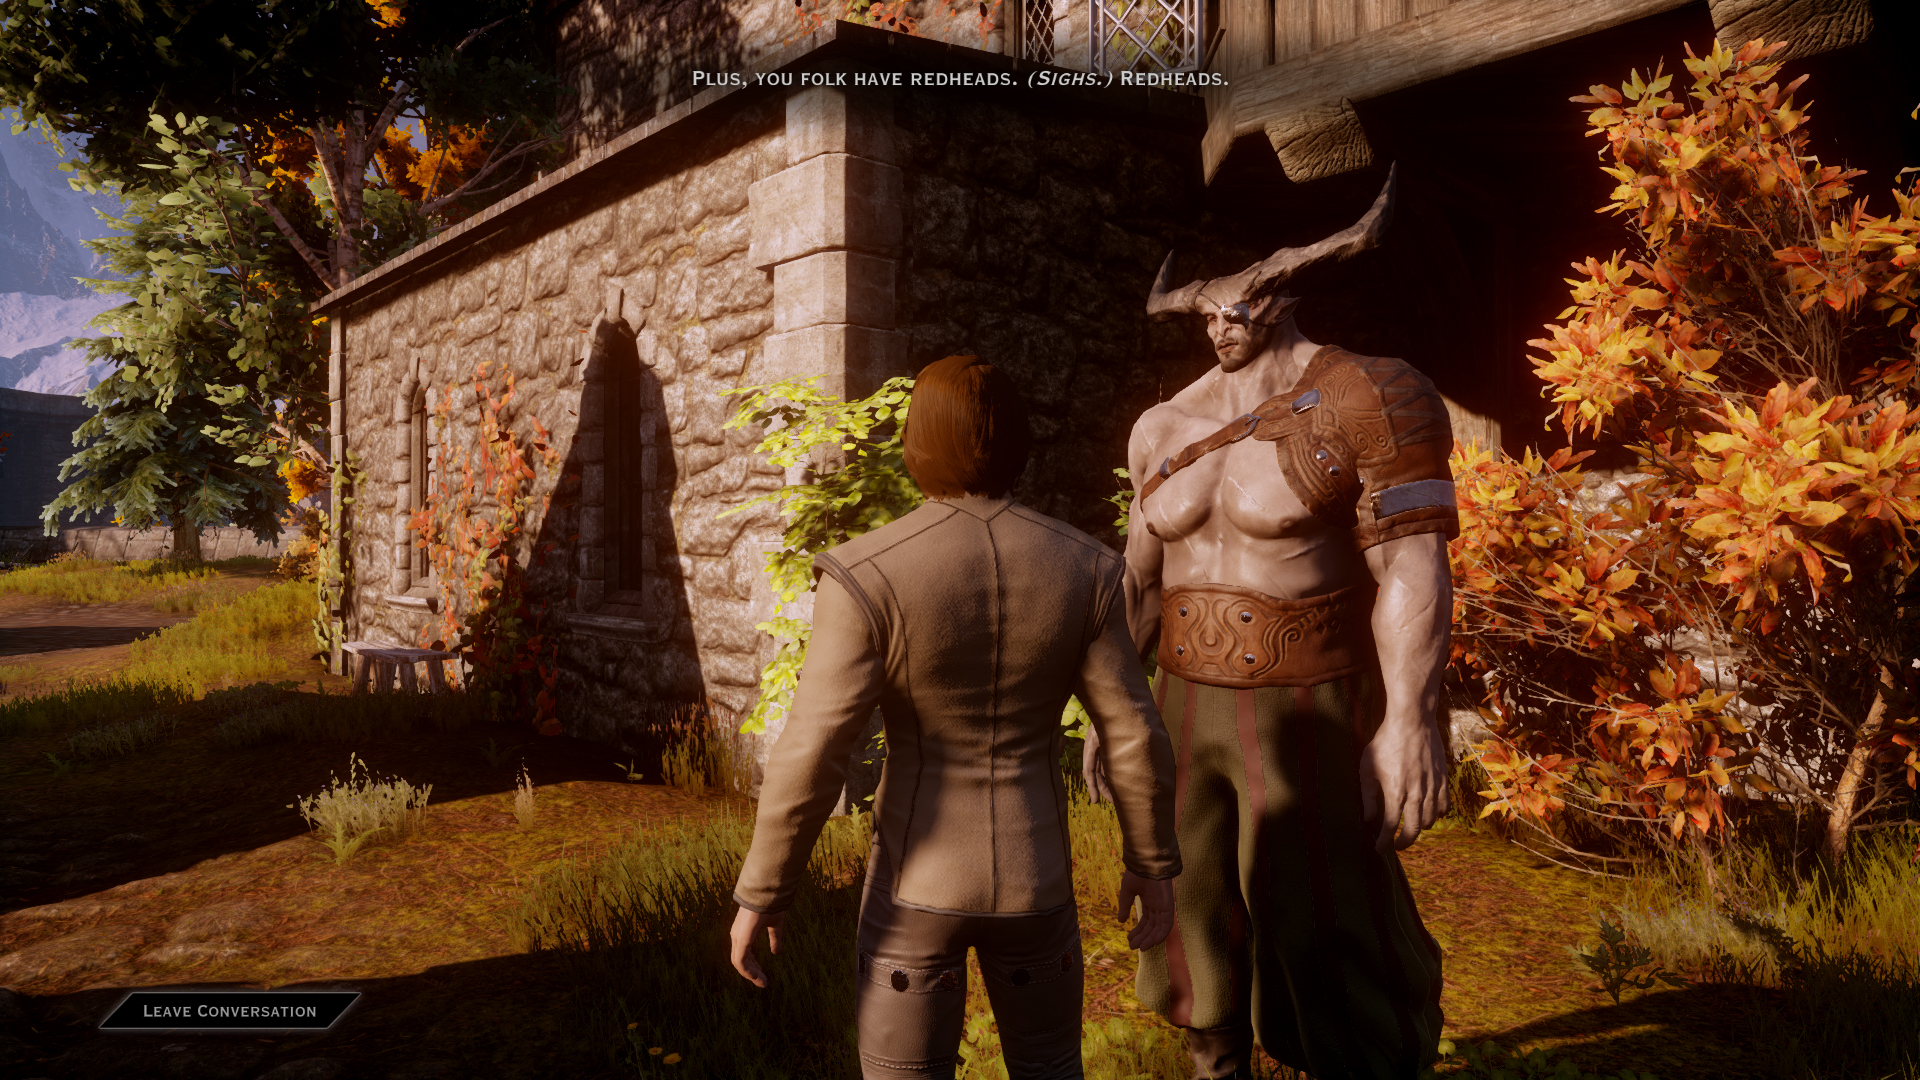 Dragon Age: Inquisition screenshots emerge, showing Varric 